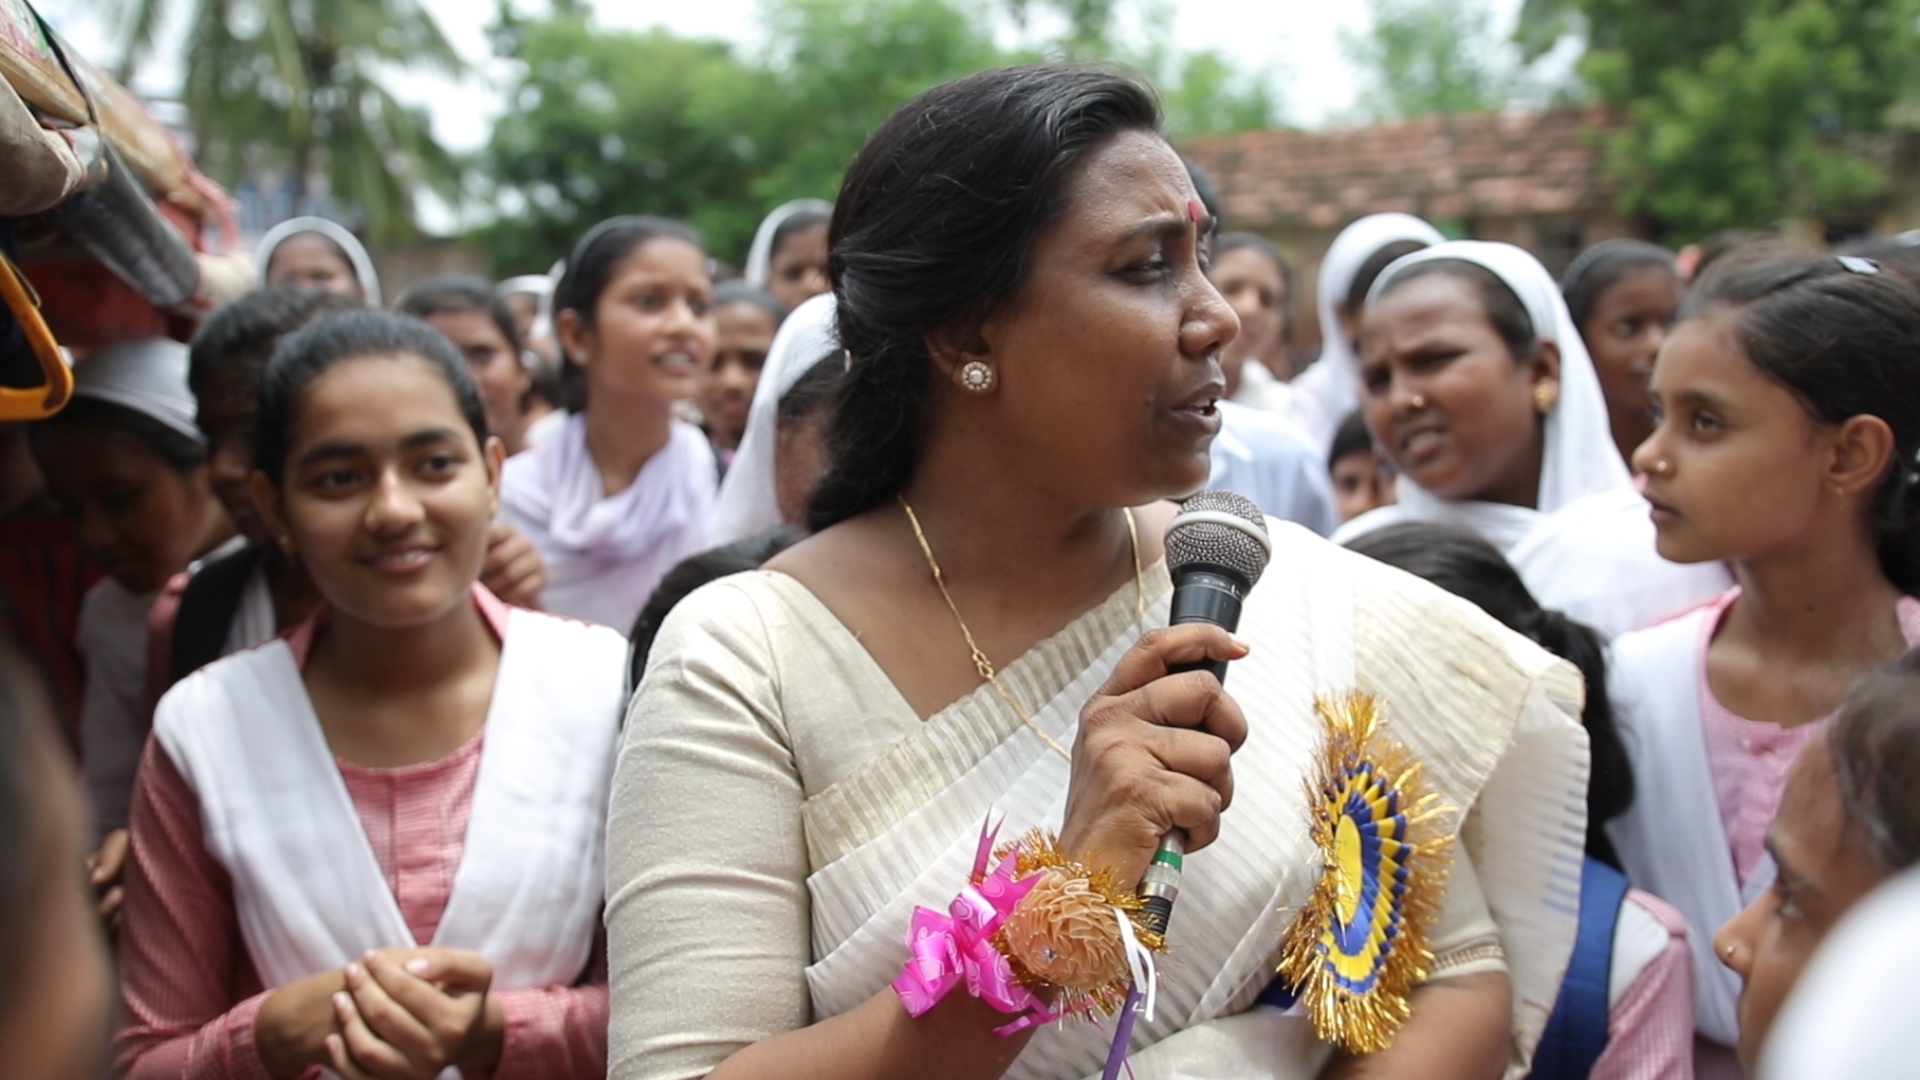 An Indian woman in a beige sari, stands amidst young Indian female students, while holding a microphone.